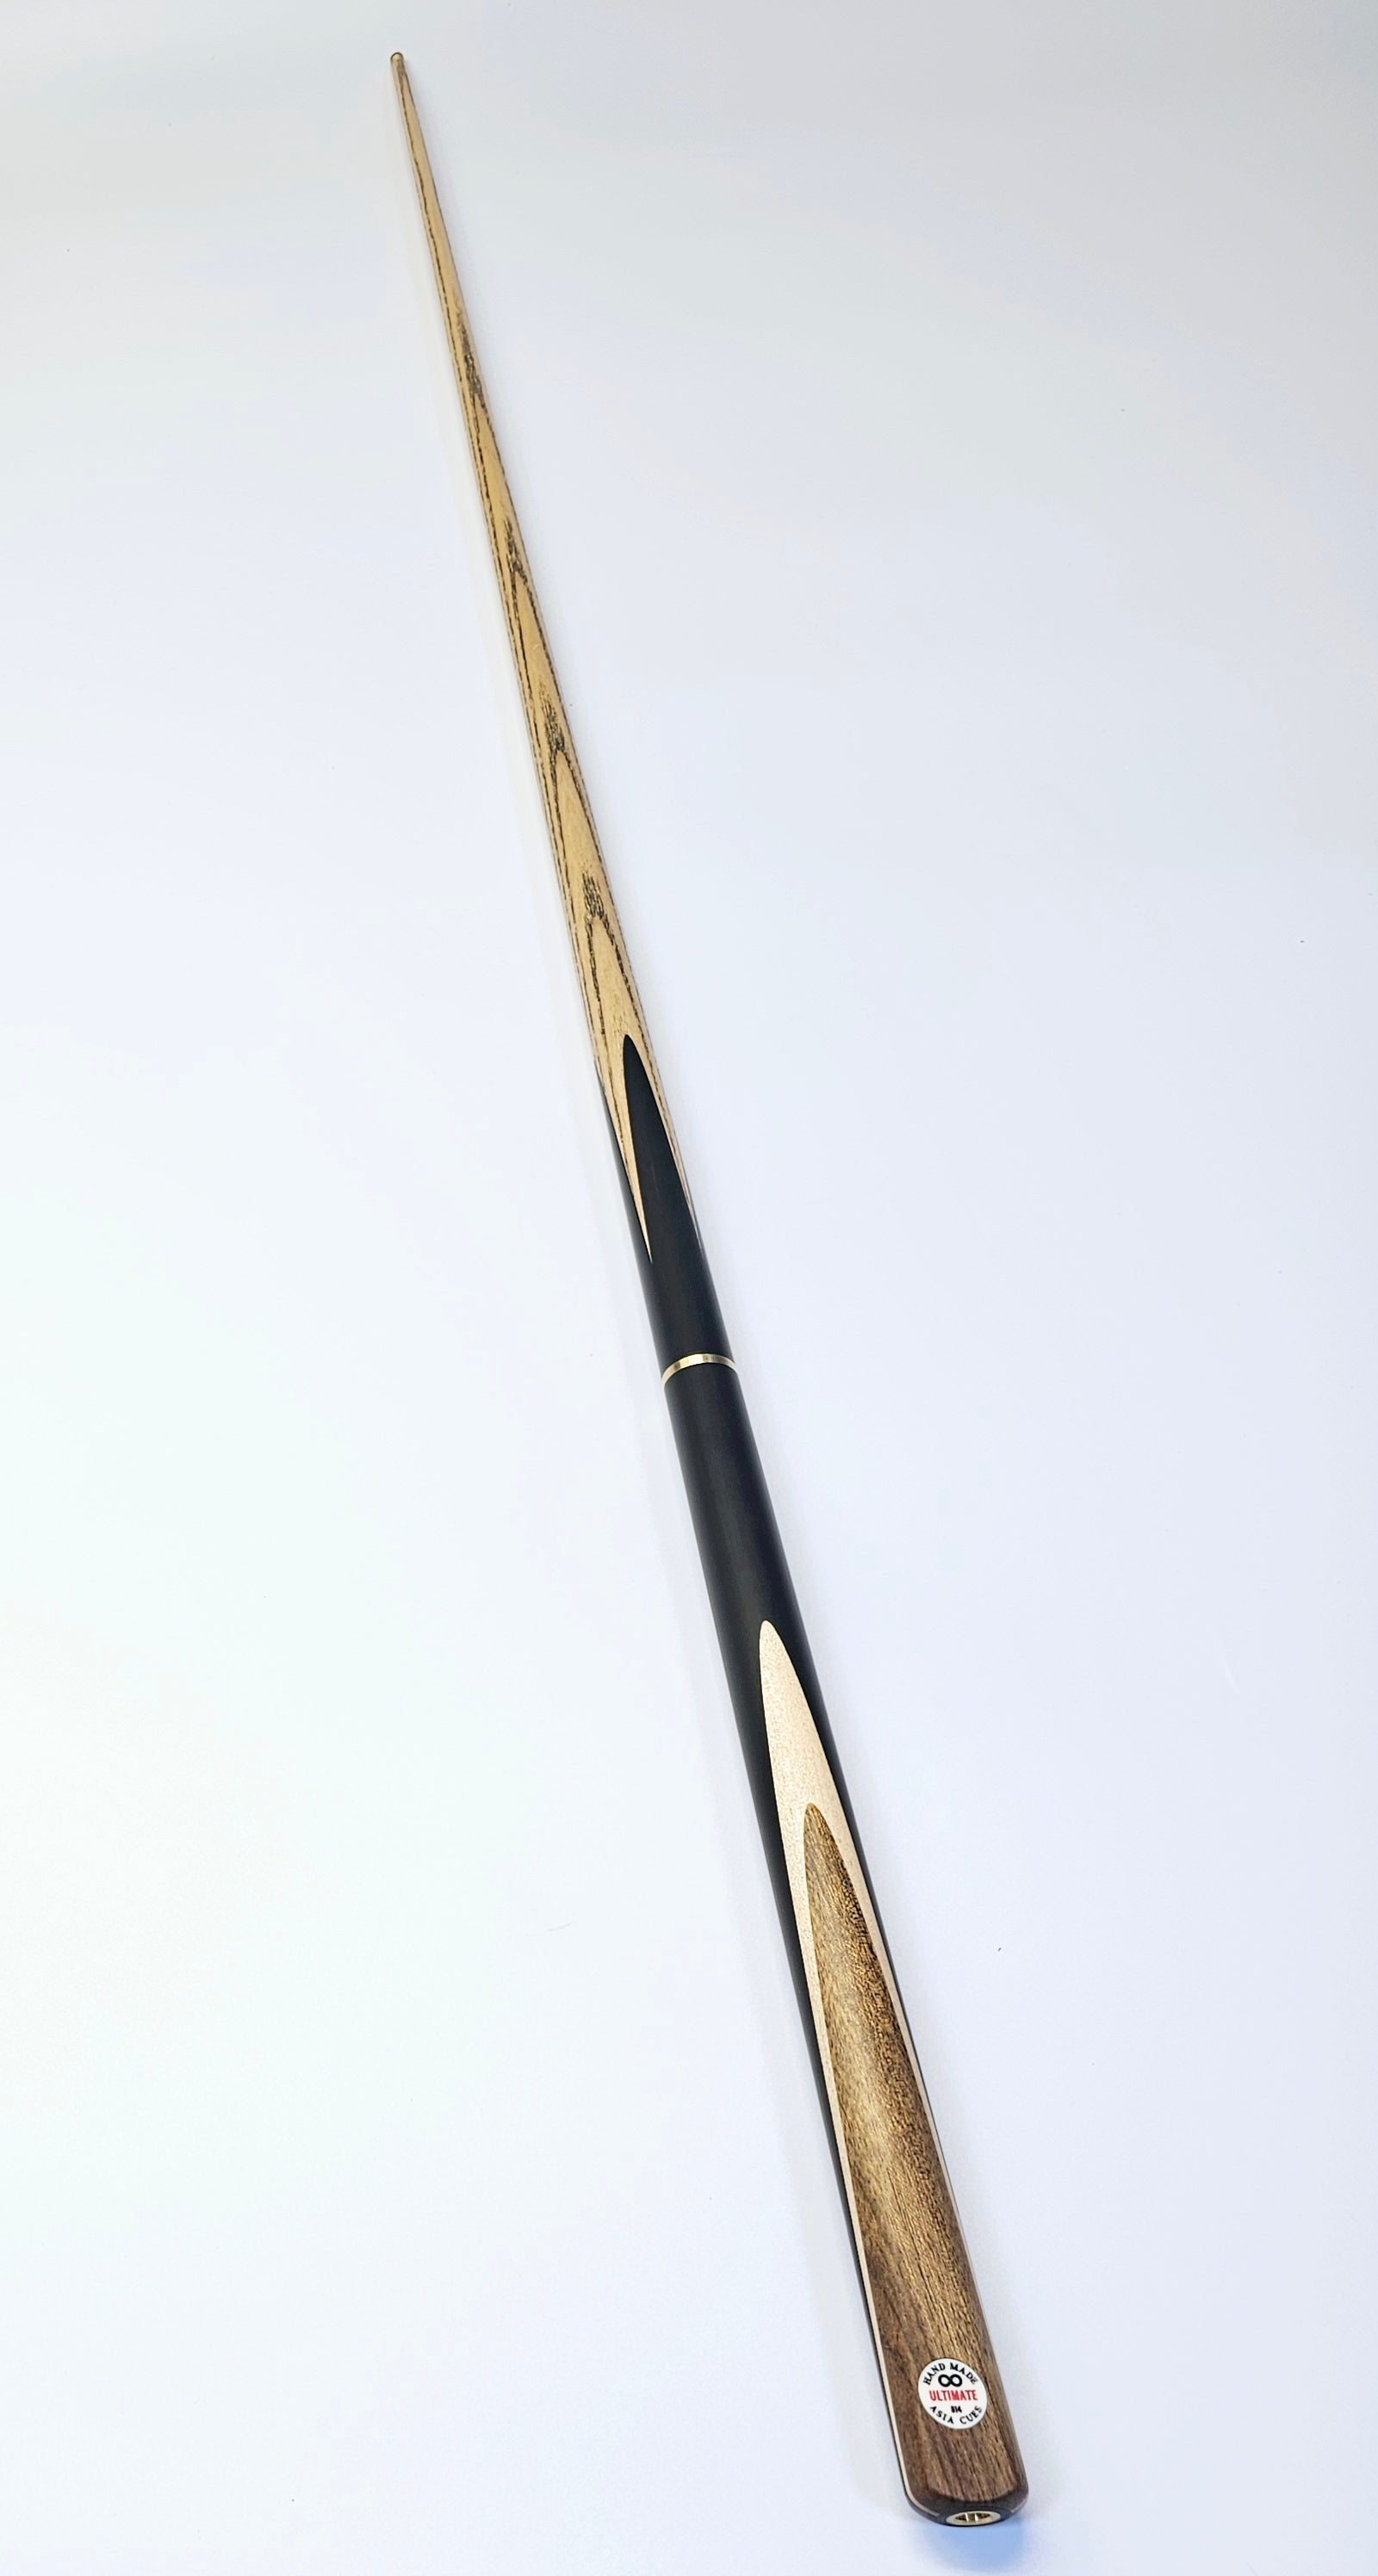 Asia Cues Ultimate No.814  - 3/4 Jointed Snooker Cue 9.7mm Tip, 18.4oz, 58"